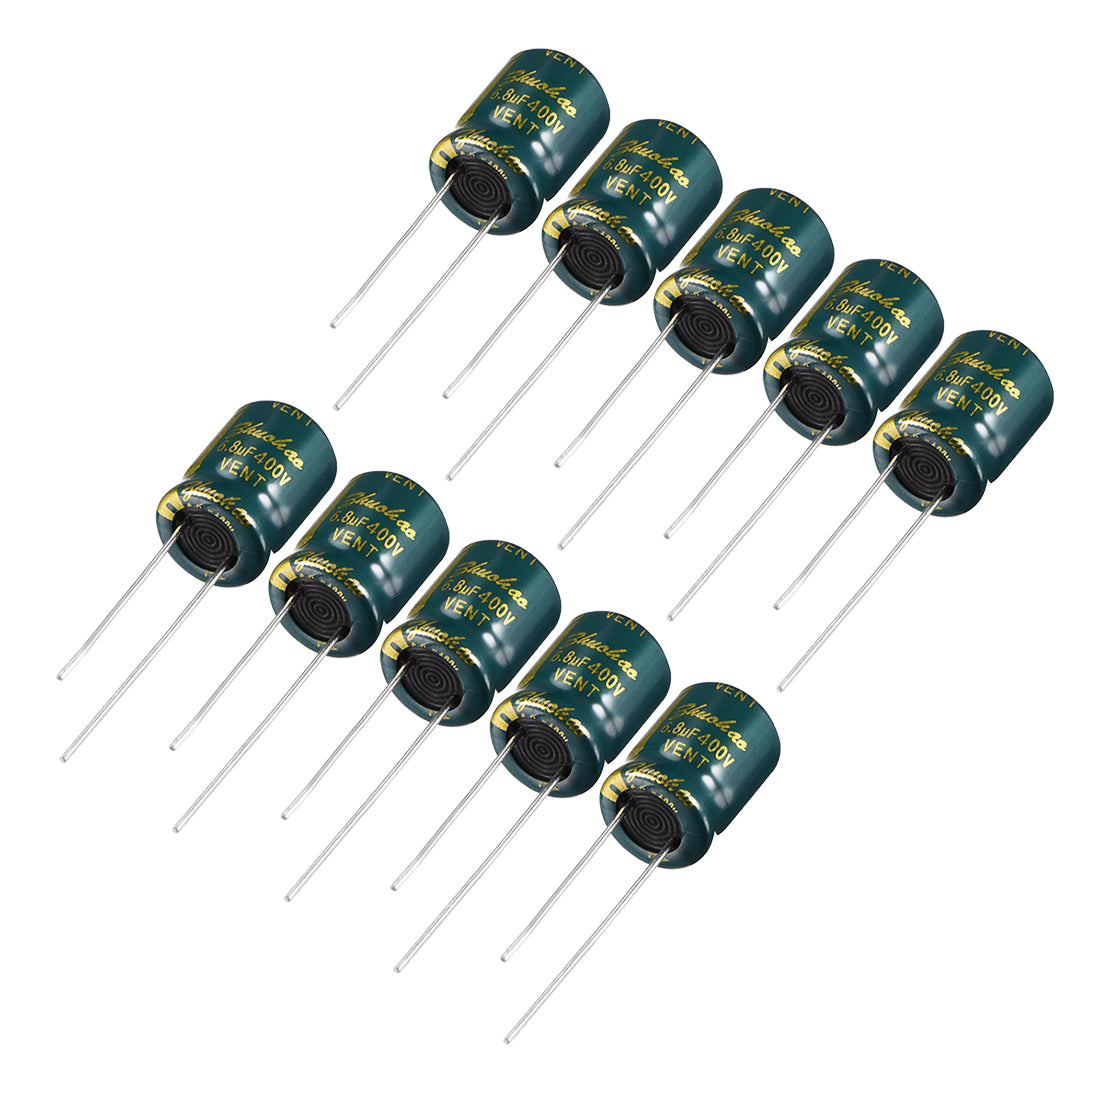 uxcell Uxcell Aluminum Radial Electrolytic Capacitor Low ESR Green with 6.8uF 400V 105 Celsius Life 3000H 10 x 13mm High Ripple Current,Low Impedance 10pcs